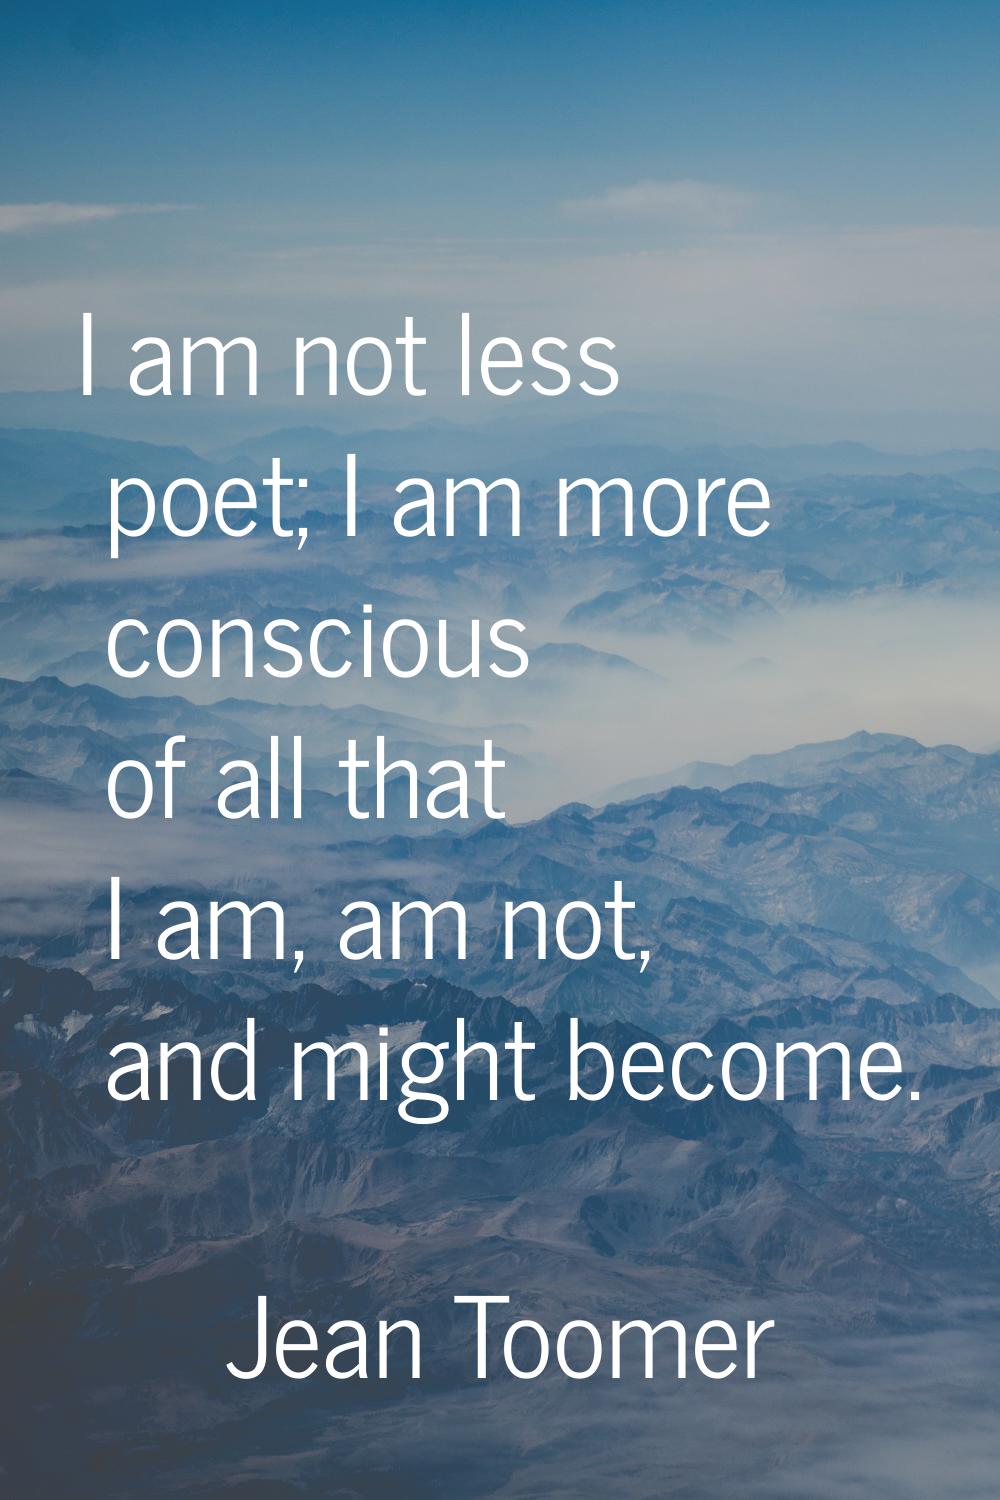 I am not less poet; I am more conscious of all that I am, am not, and might become.